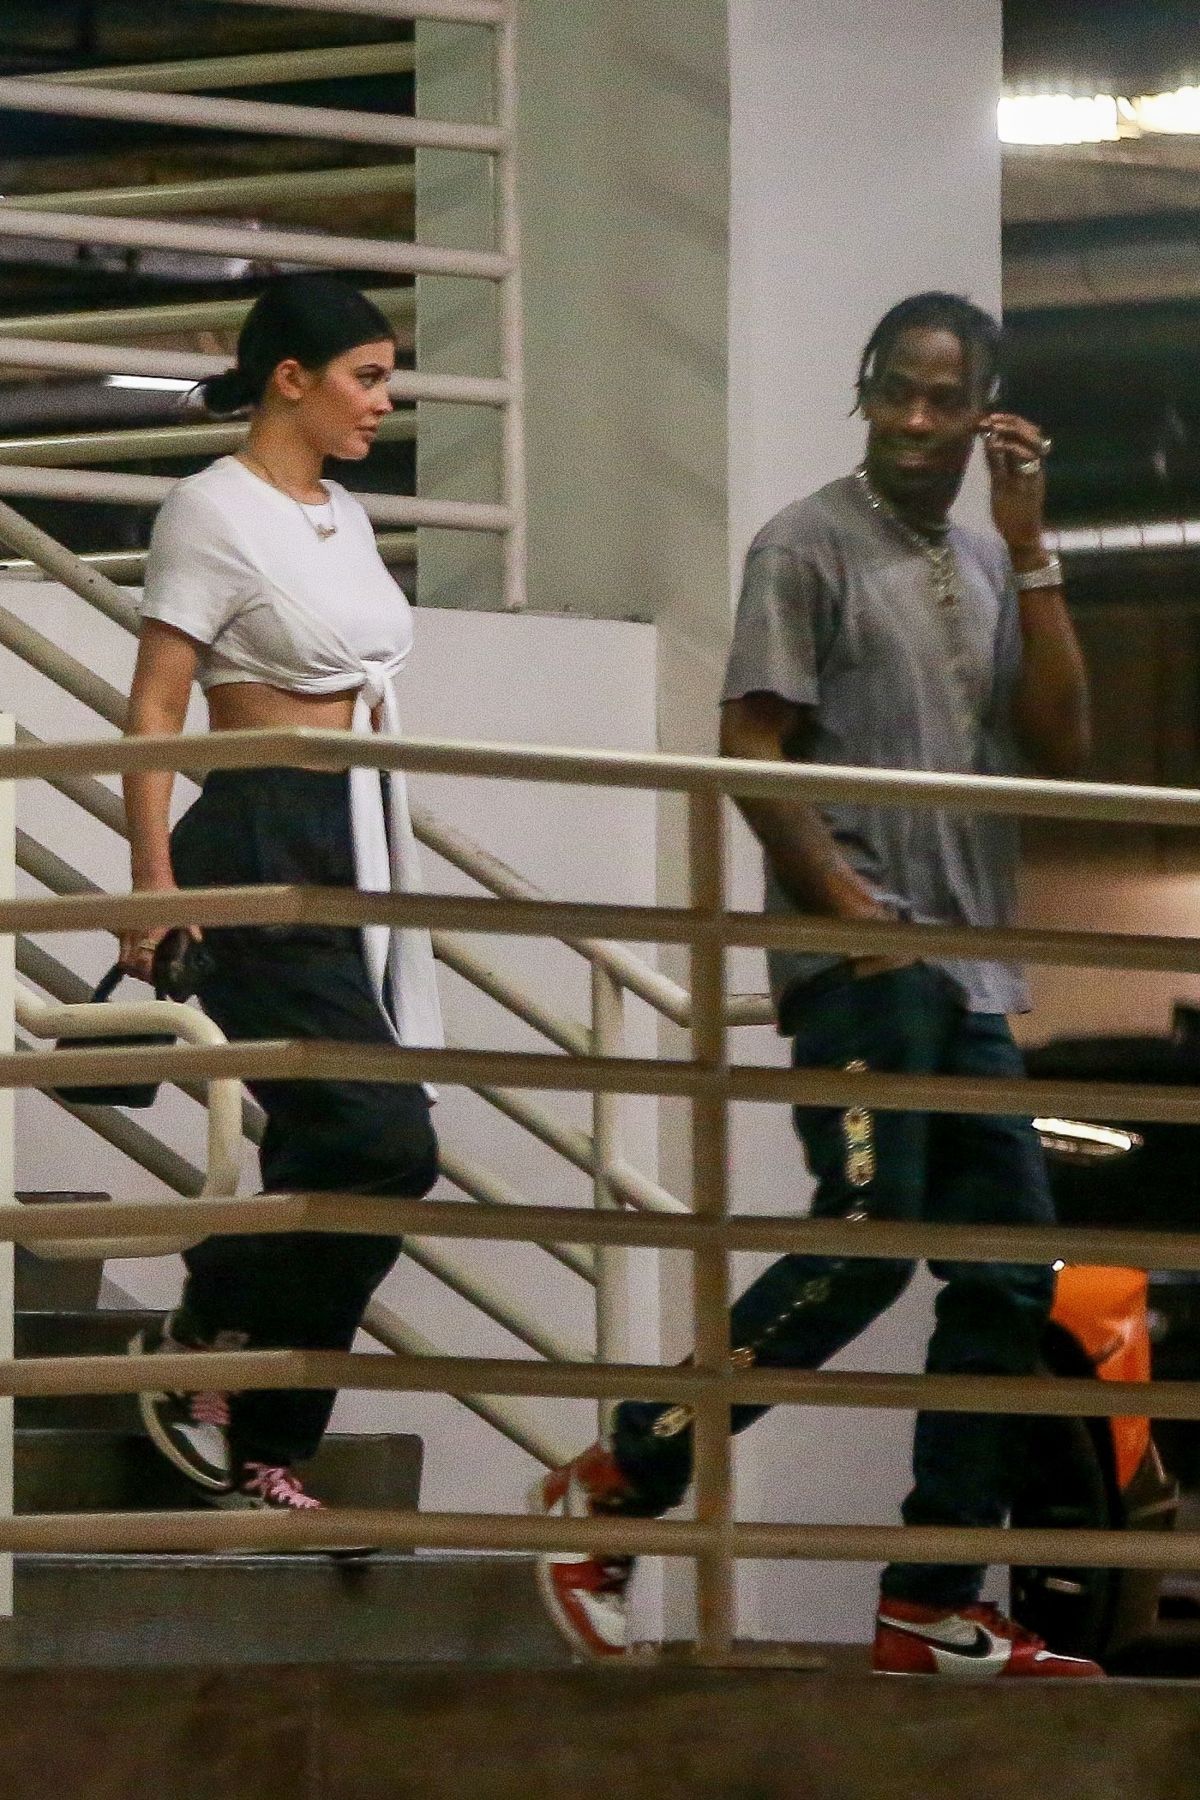 kylie-jenner-and-travis-scott-out-in-beverly-hills-04-08-2019-4.jpg